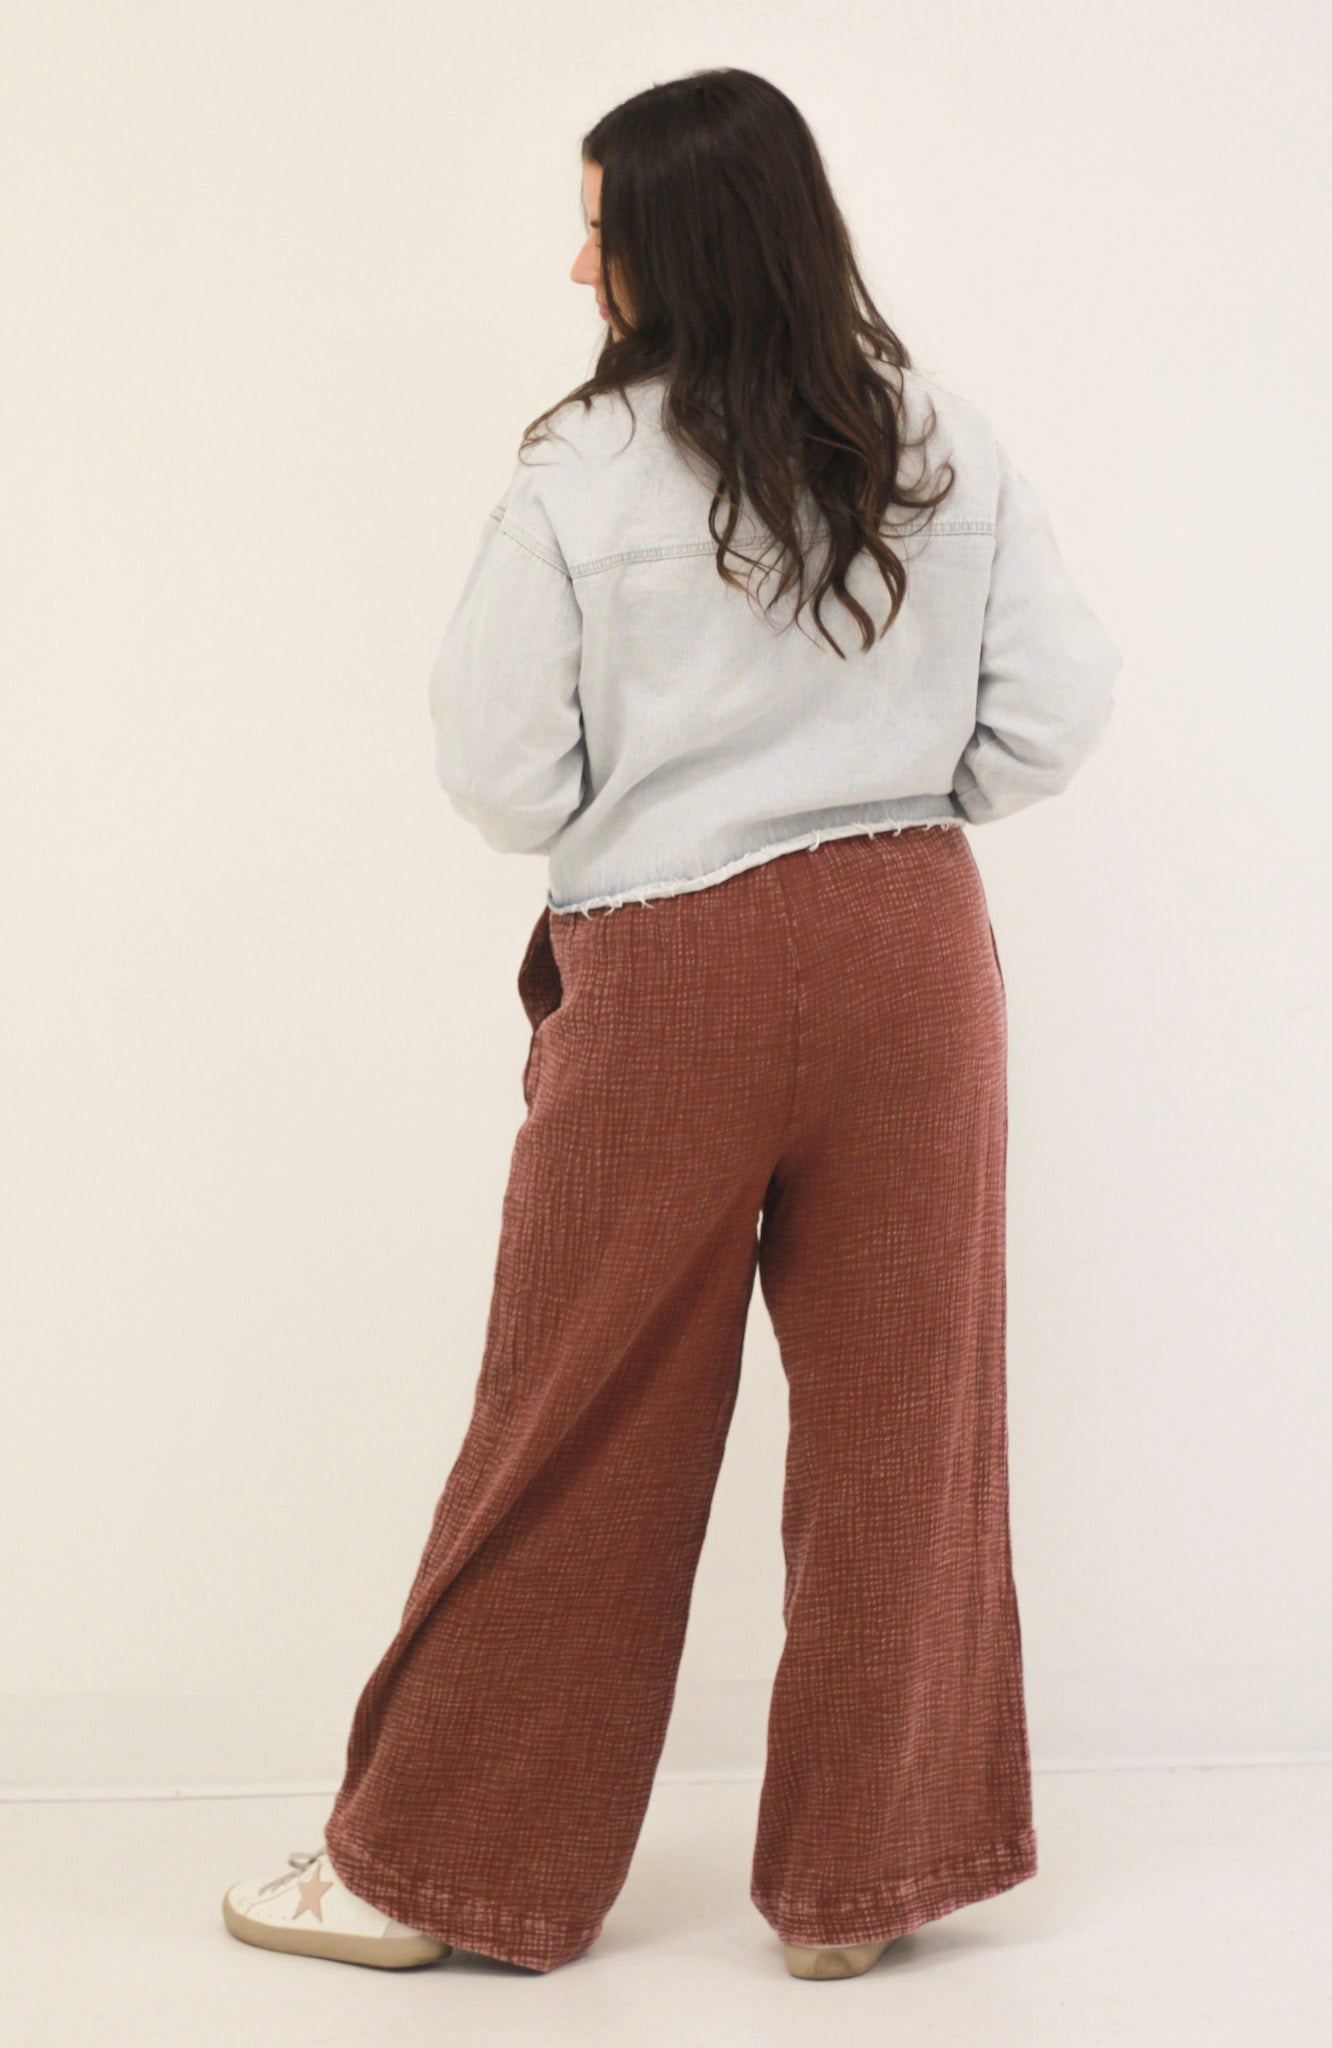 I'll Have These Mineral Wash Pants in Red Bean